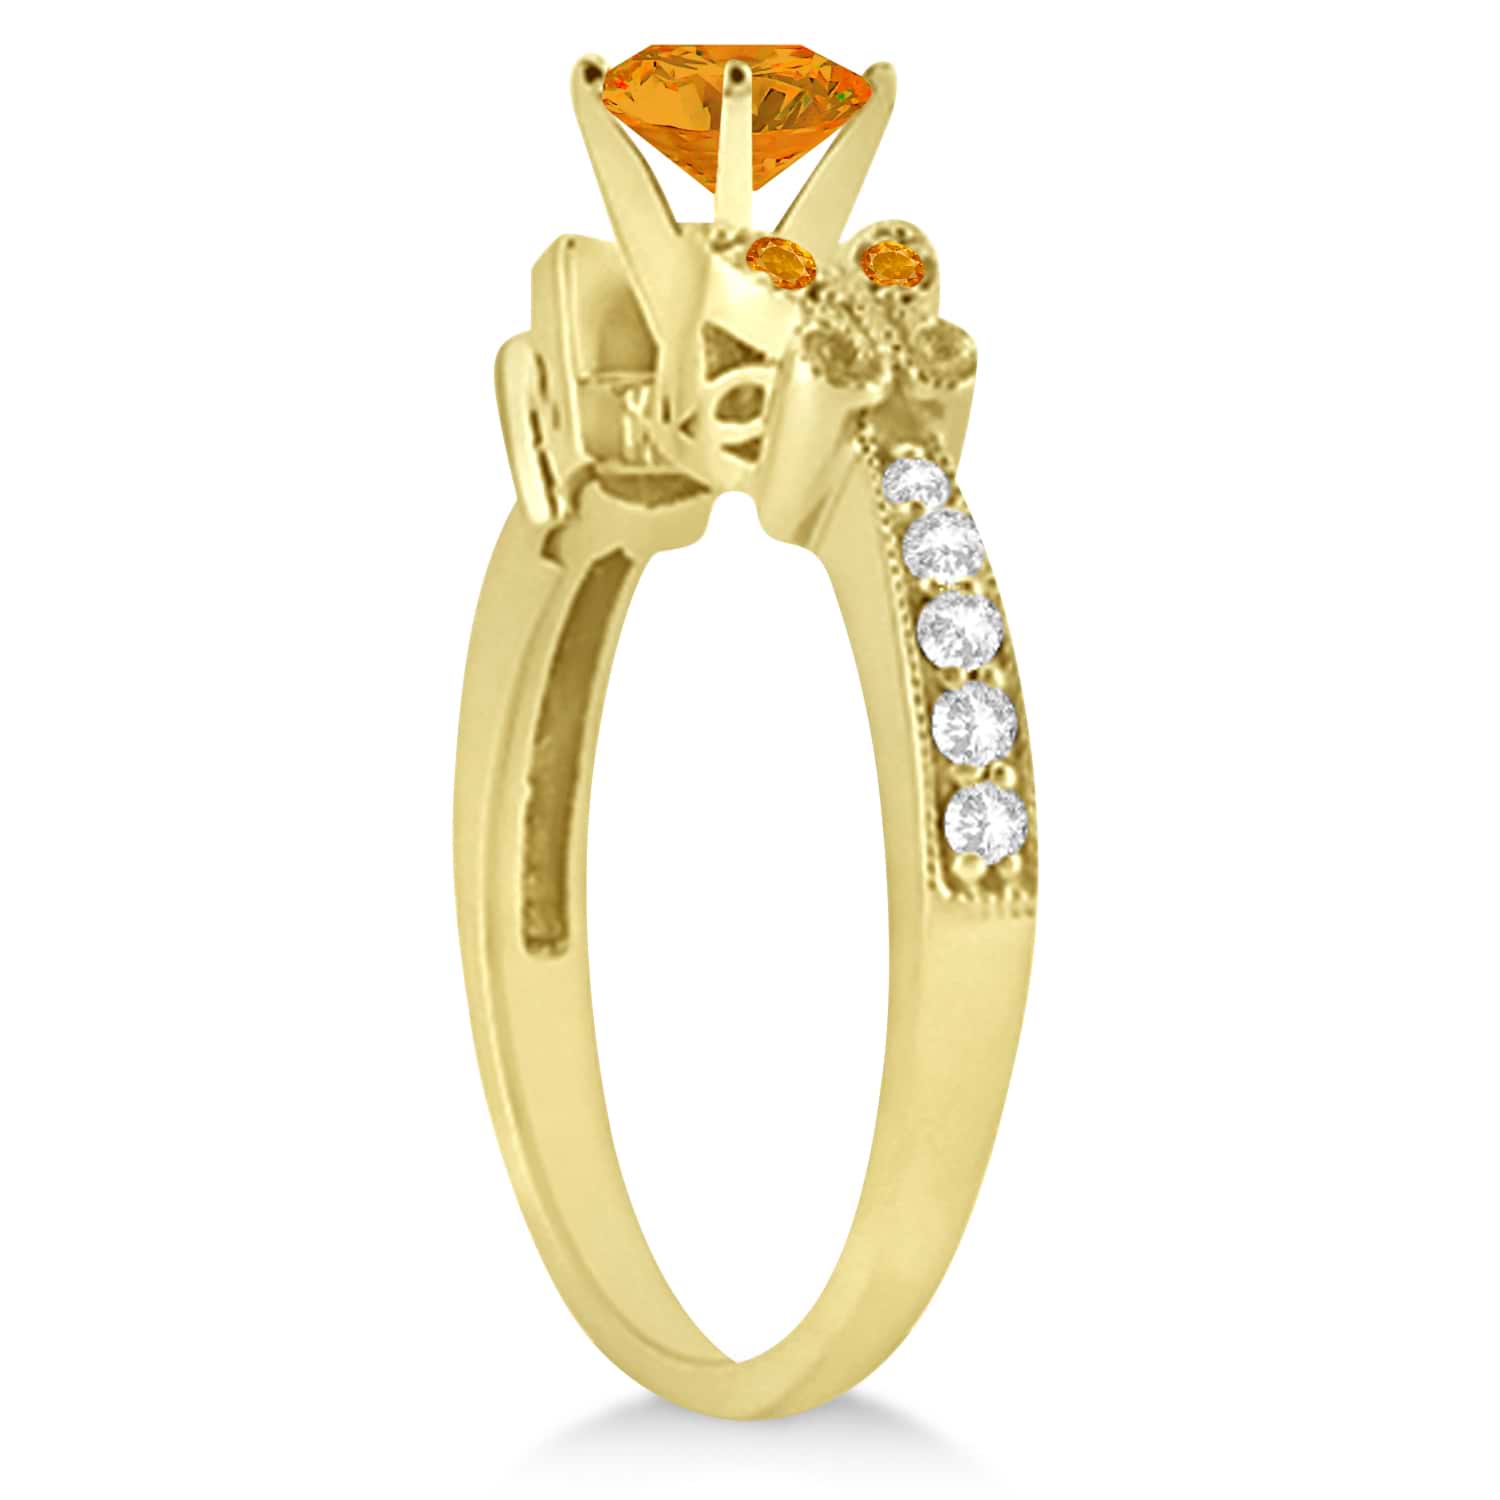 Butterfly Genuine Citrine & Diamond Engagement Ring 14k Yellow Gold (1.53ct)